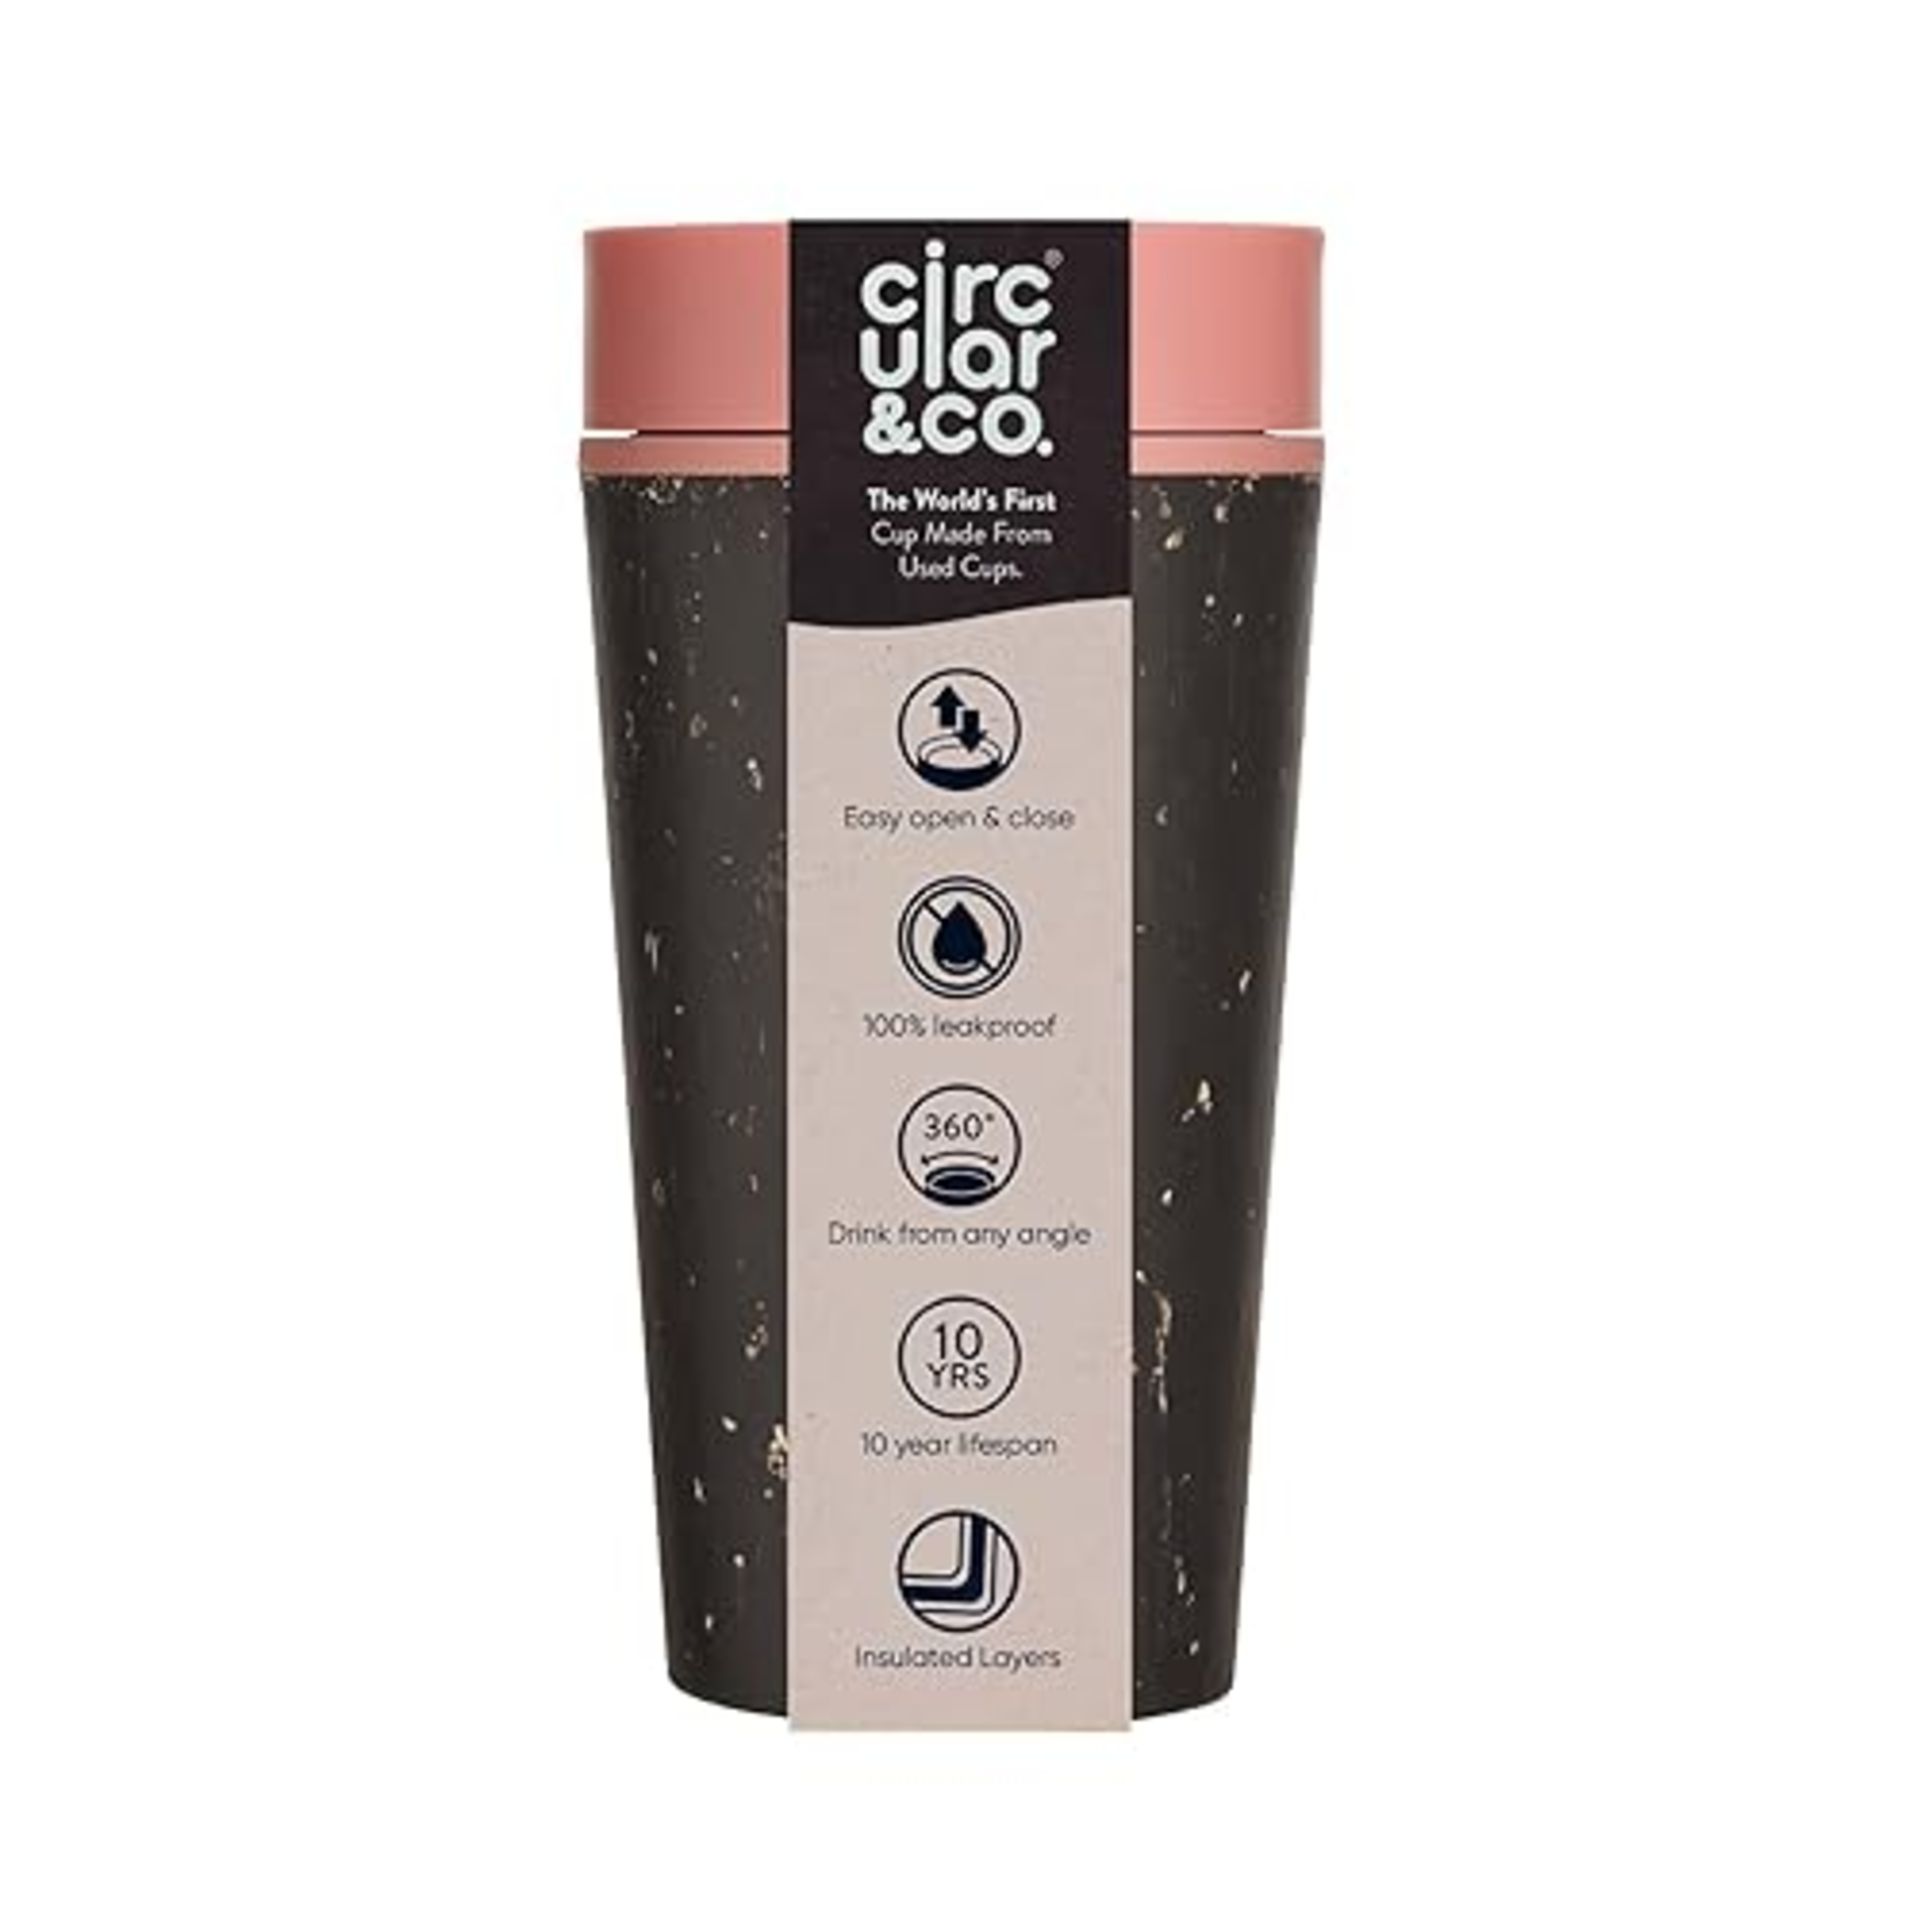 Circular and Co Leakproof Reusable Coffee Cup 12oz/340ml - The World's First Travel Mug Made from R